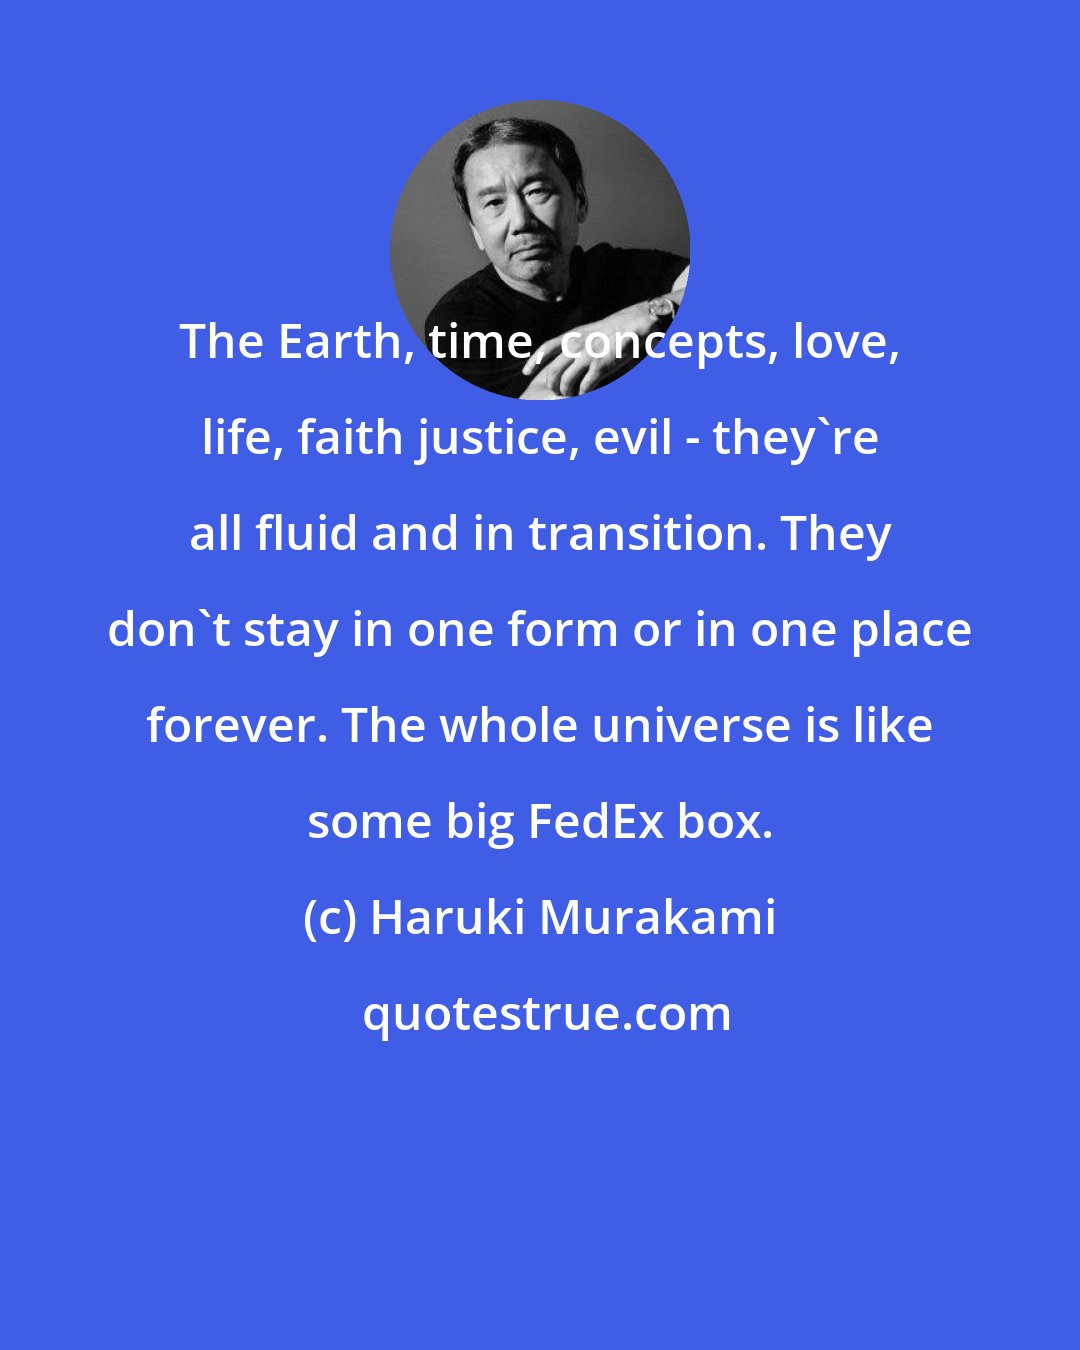 Haruki Murakami: The Earth, time, concepts, love, life, faith justice, evil - they're all fluid and in transition. They don't stay in one form or in one place forever. The whole universe is like some big FedEx box.